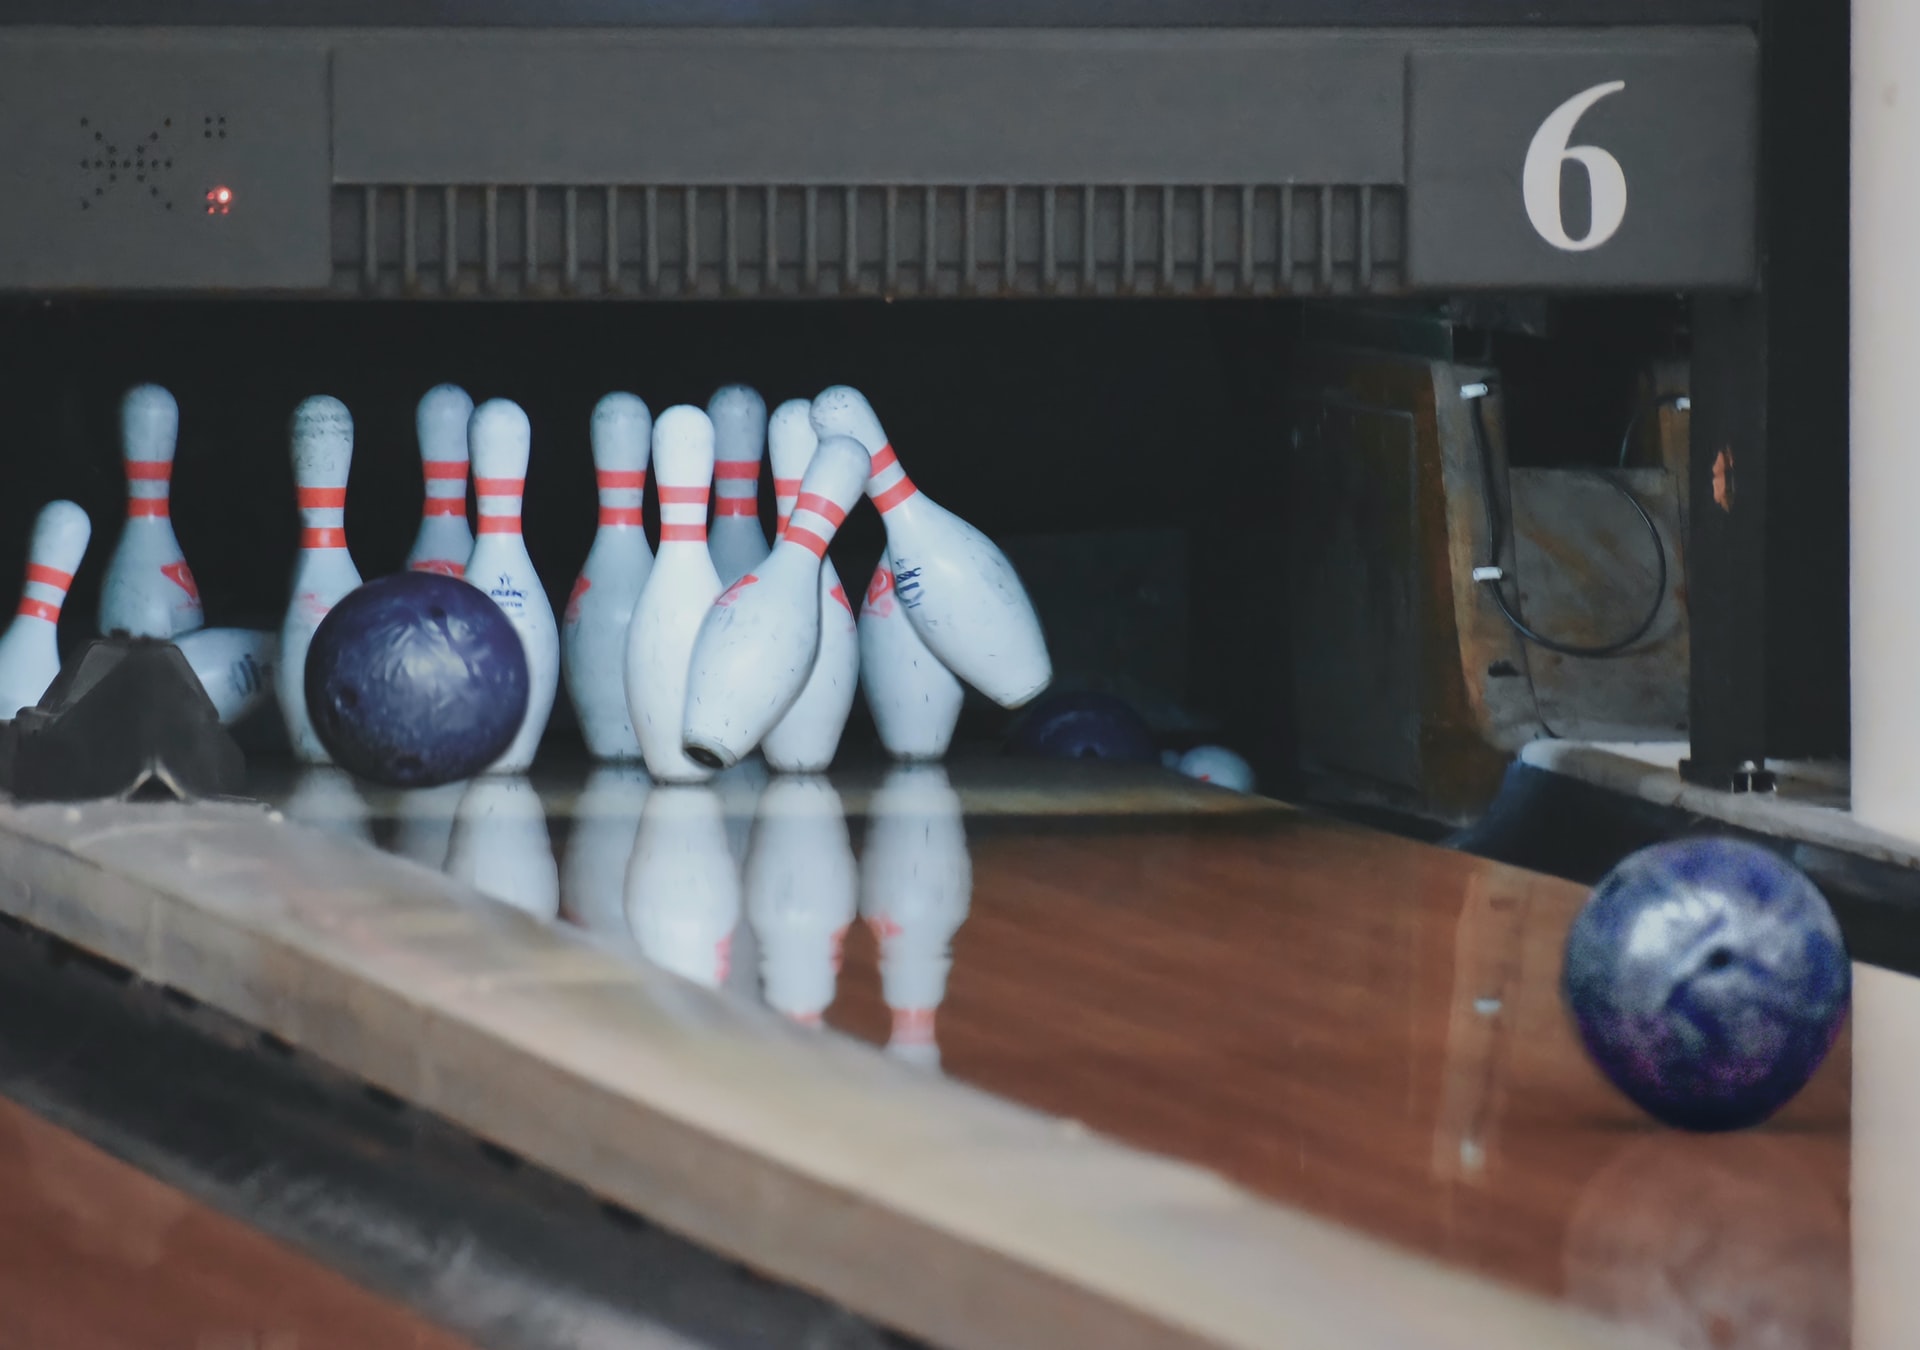 Enjoy Some Friendly Competition at Bowlero